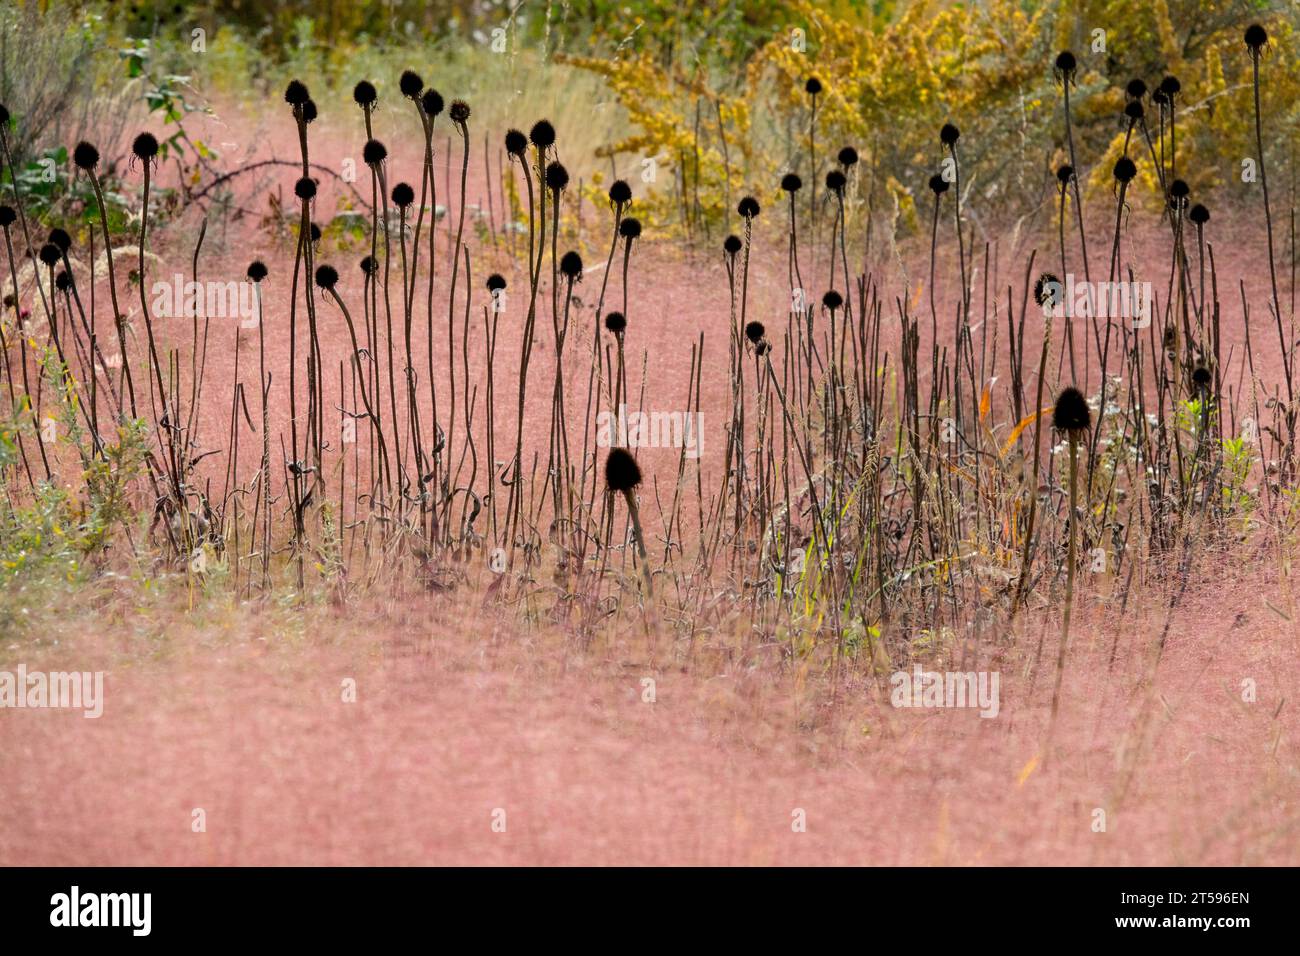 Dried, coneflowers, Seed heads, Garden, Meadow, October, Pink Muhly Grass, Ornamental, Muhlenbergia, Grass, Autumn Stock Photo